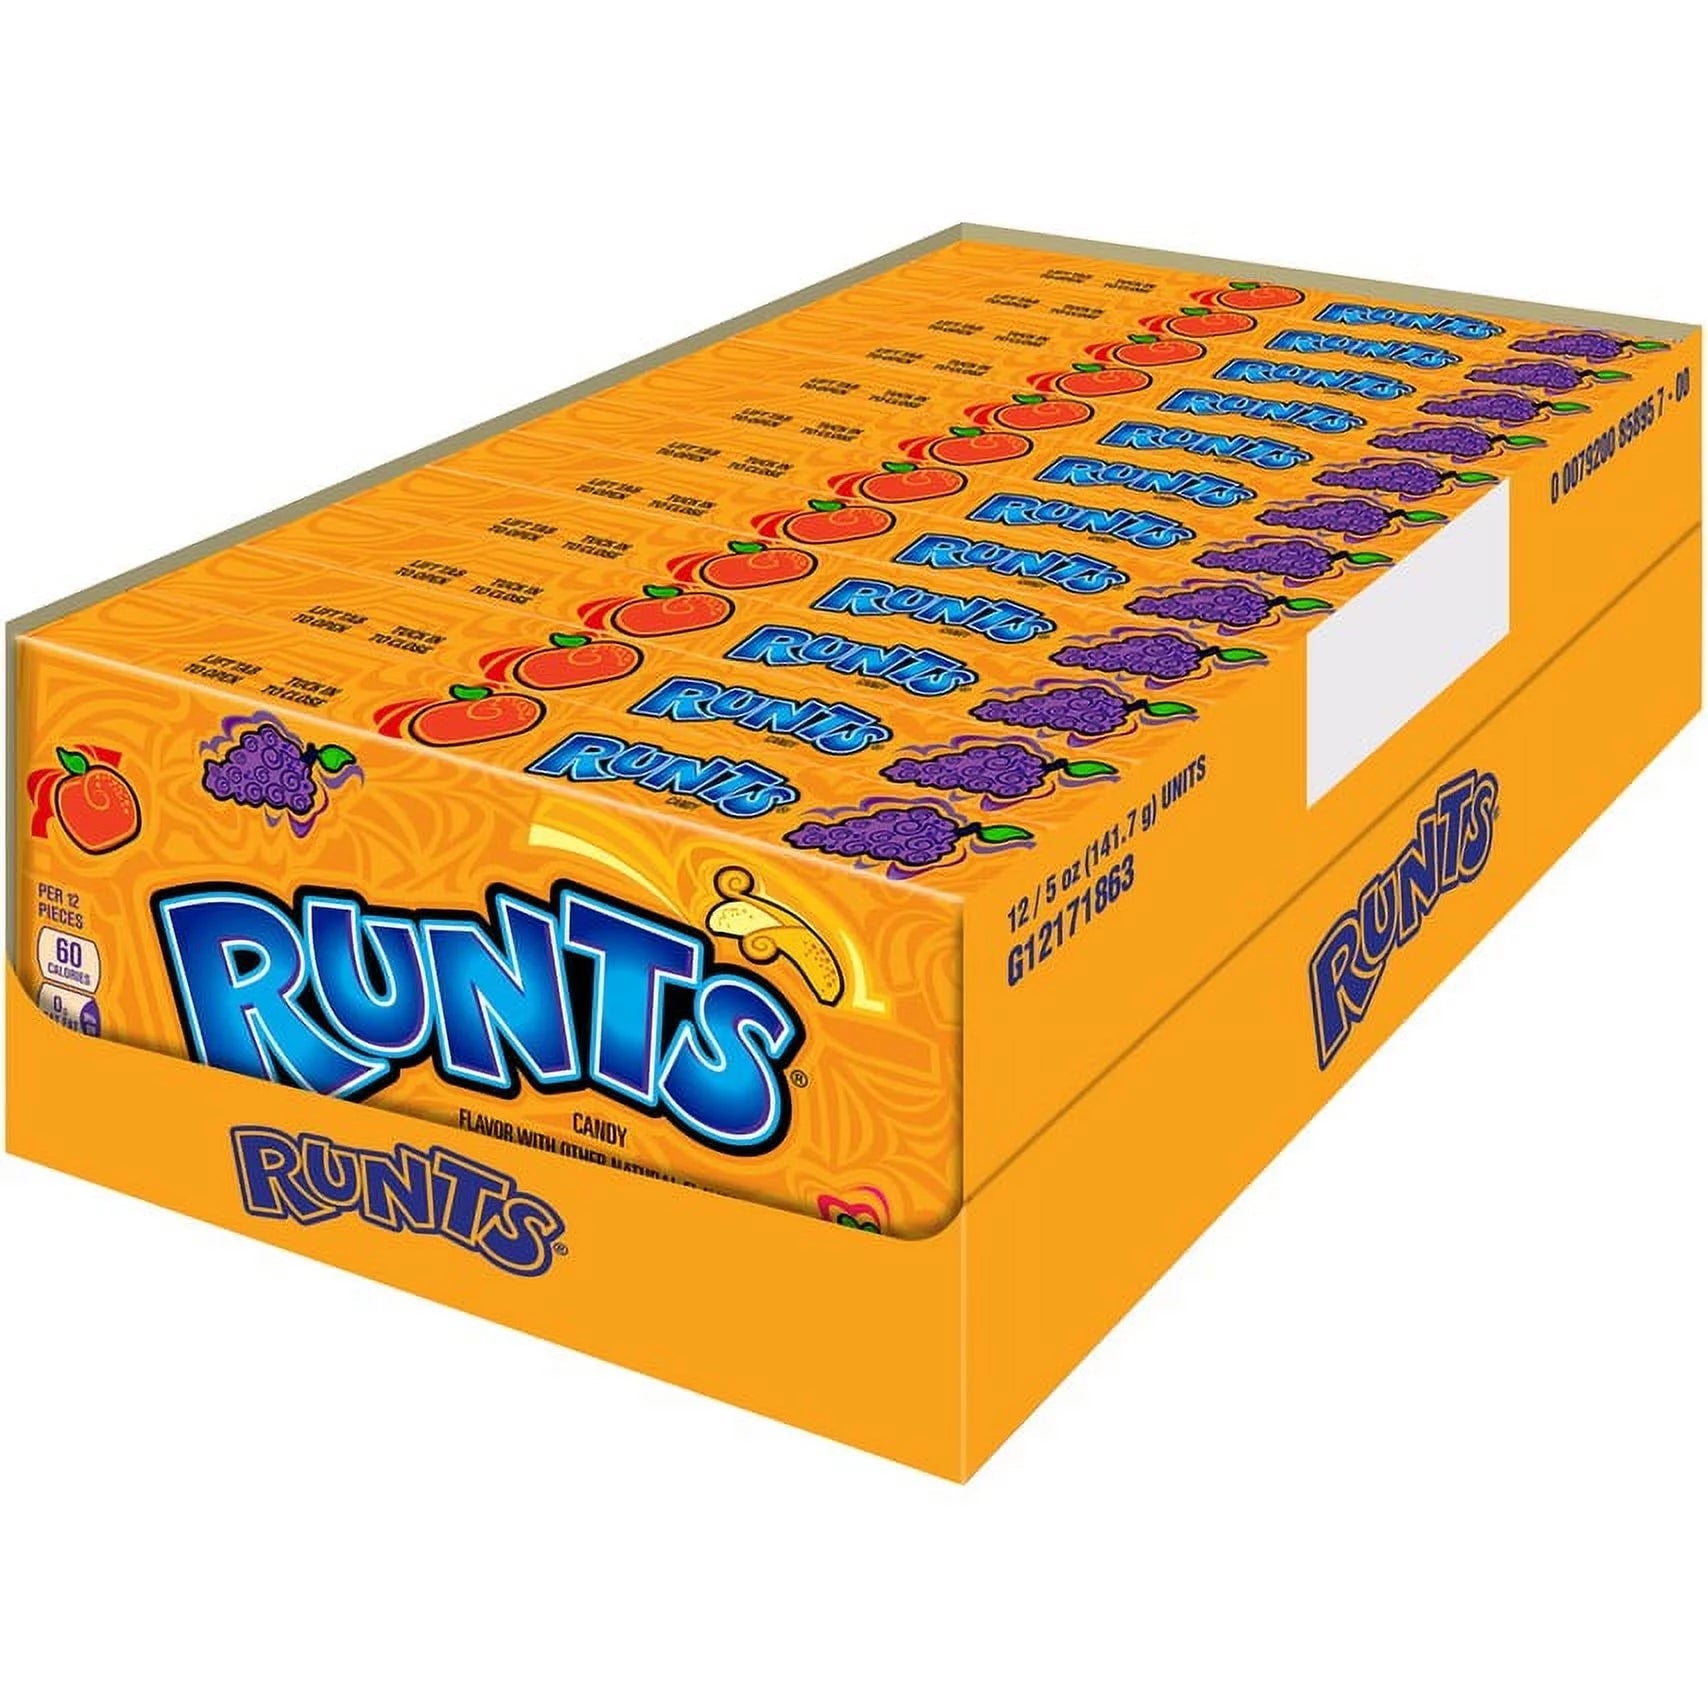 Runts - Hard Candy theater Box, (5 oz ,12 Ct.) - Vintage Candy Co.